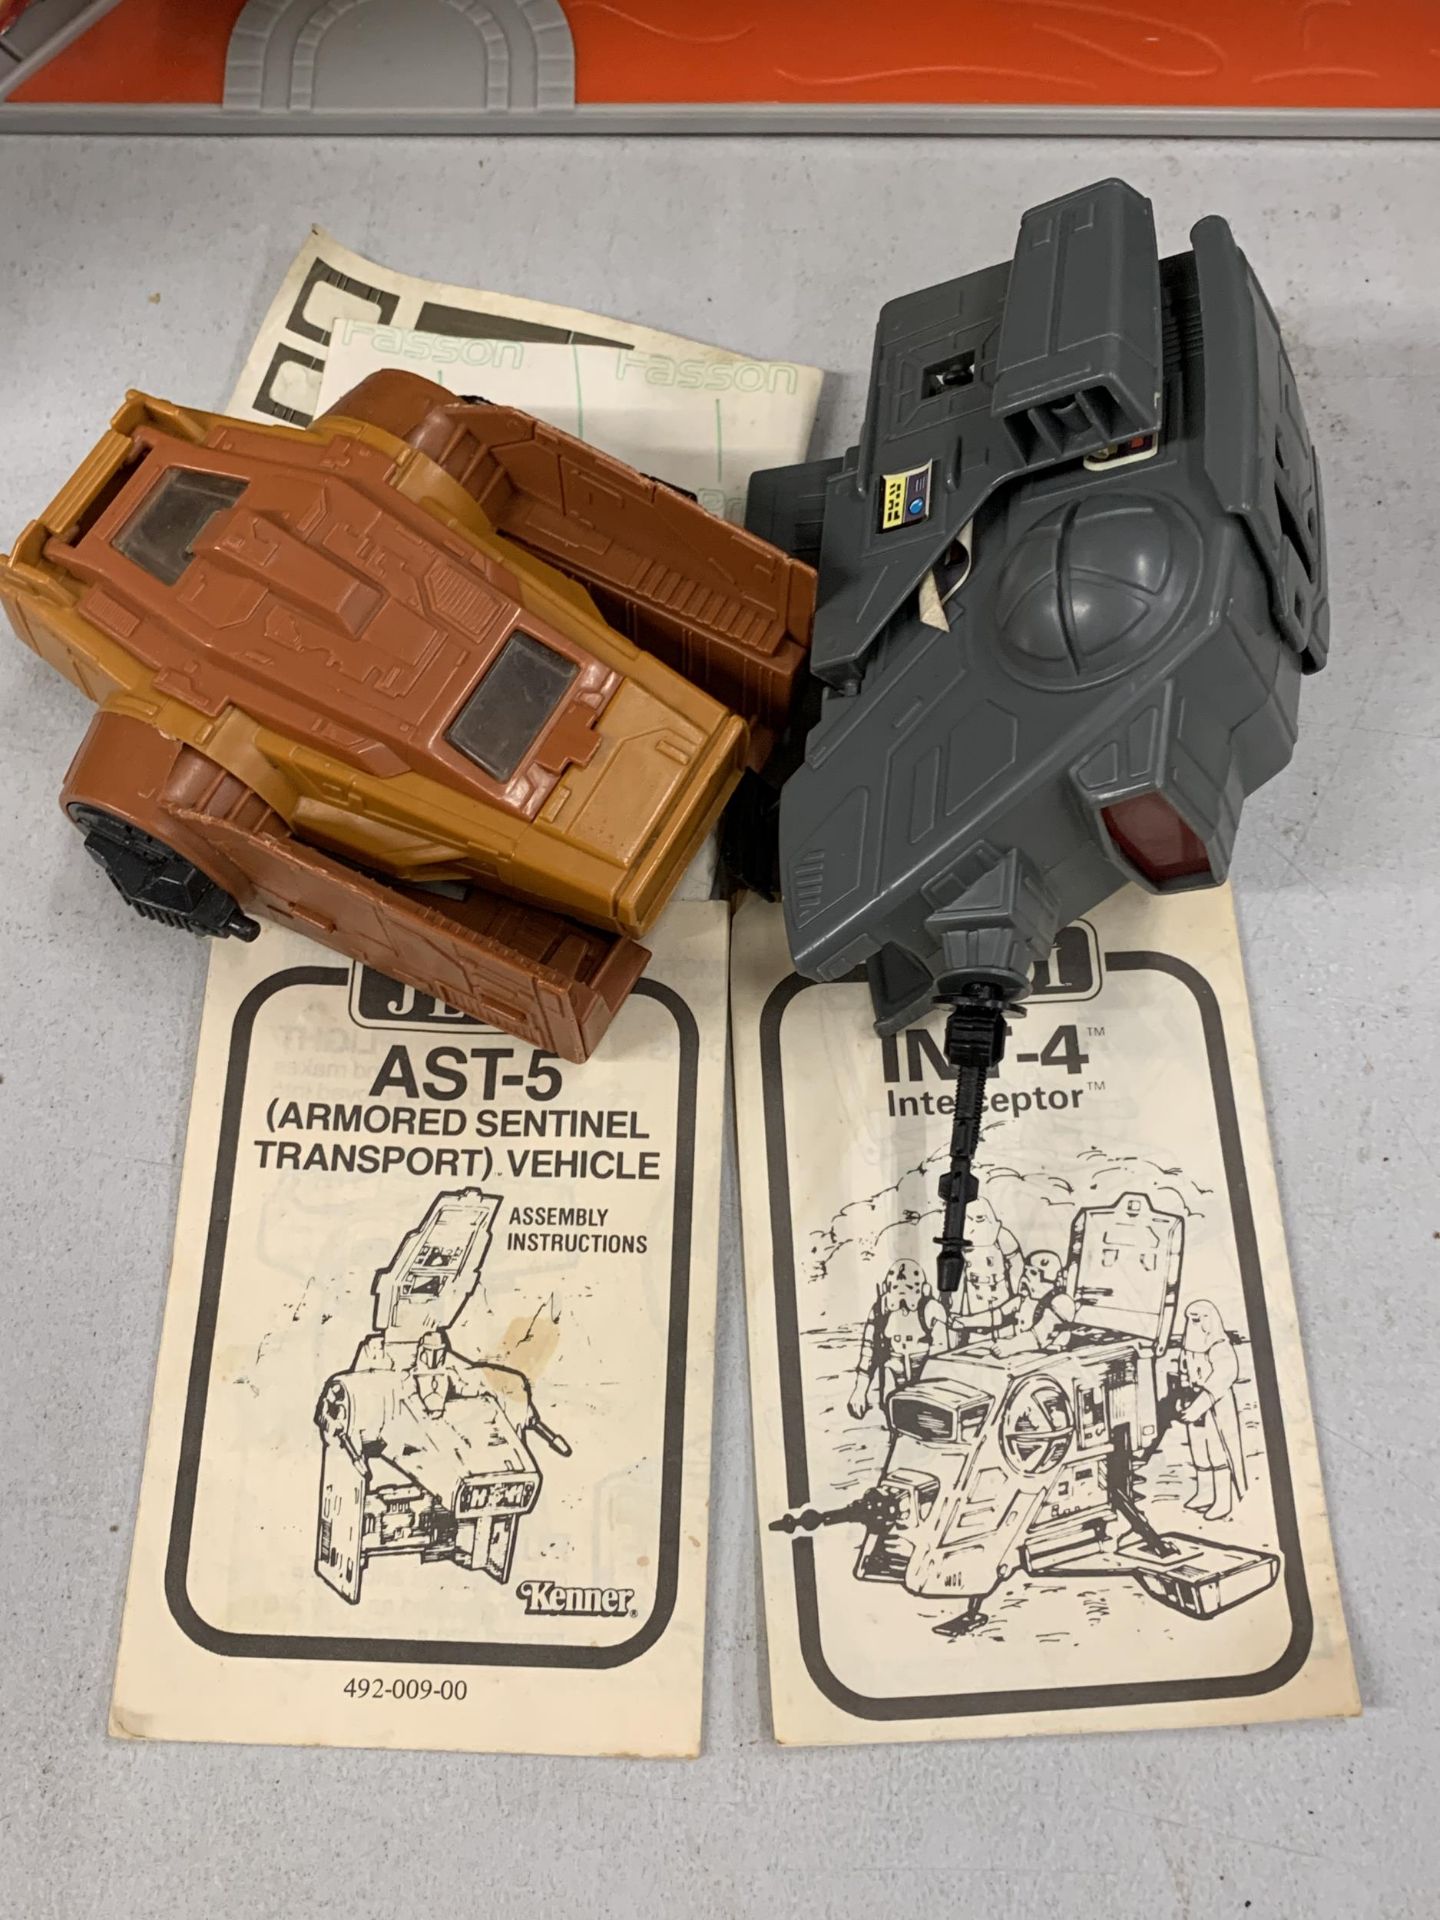 A STAR WARS RETURN OF THE JEDI AST-5 (ARMORED SENTINEL TRANSPORT) VEHICLE AND A INT-4 INTERCEPTOR - Image 2 of 2